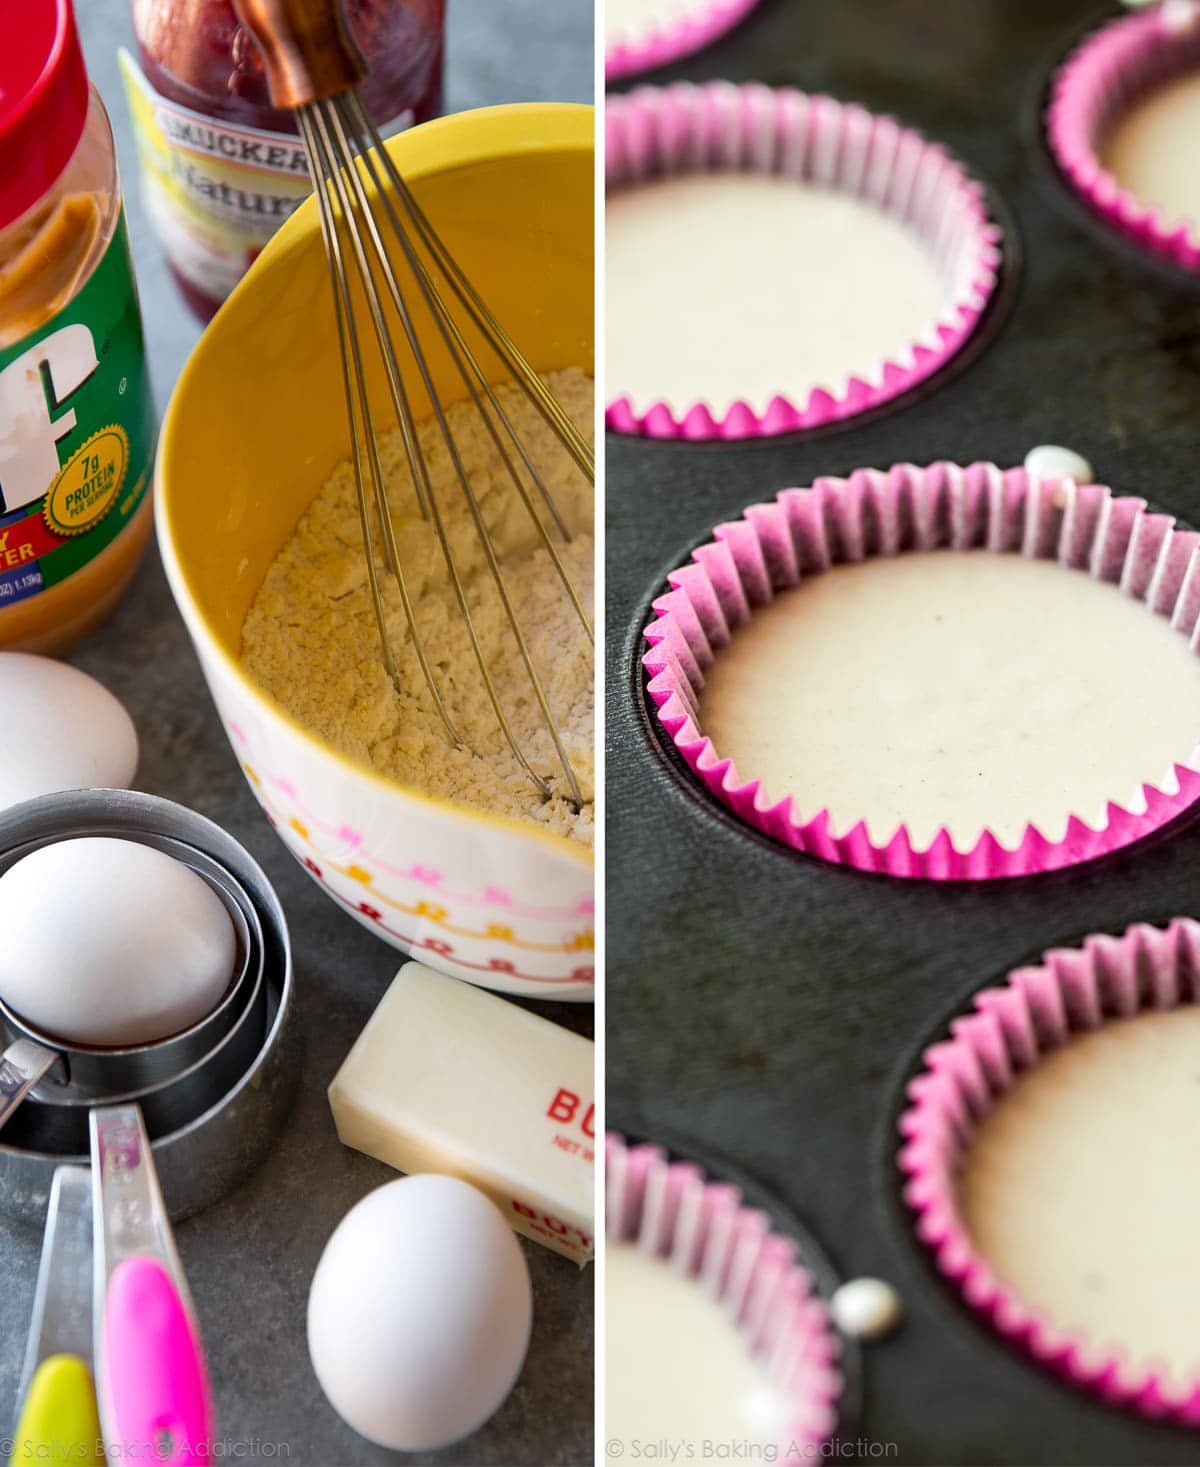 2 images of ingredients for peanut butter and jelly cupcakes and vanilla cupcake batter in a cupcake pan before baking